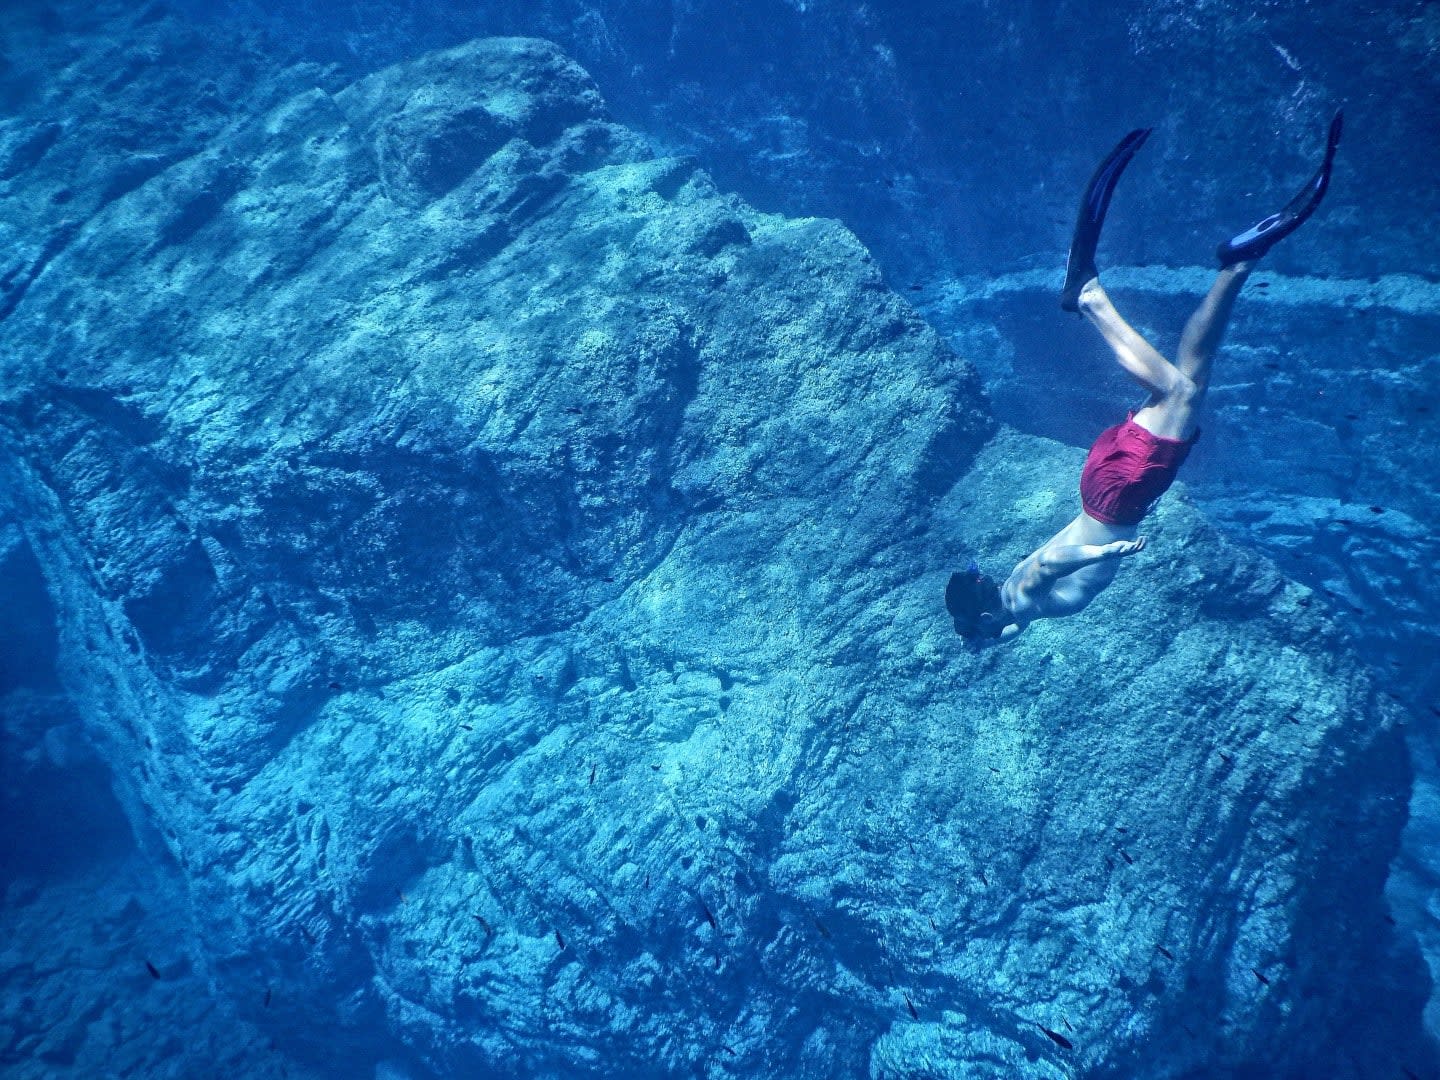 Free Diving Documentary 'The Deepest Breath' Is a Love Story About